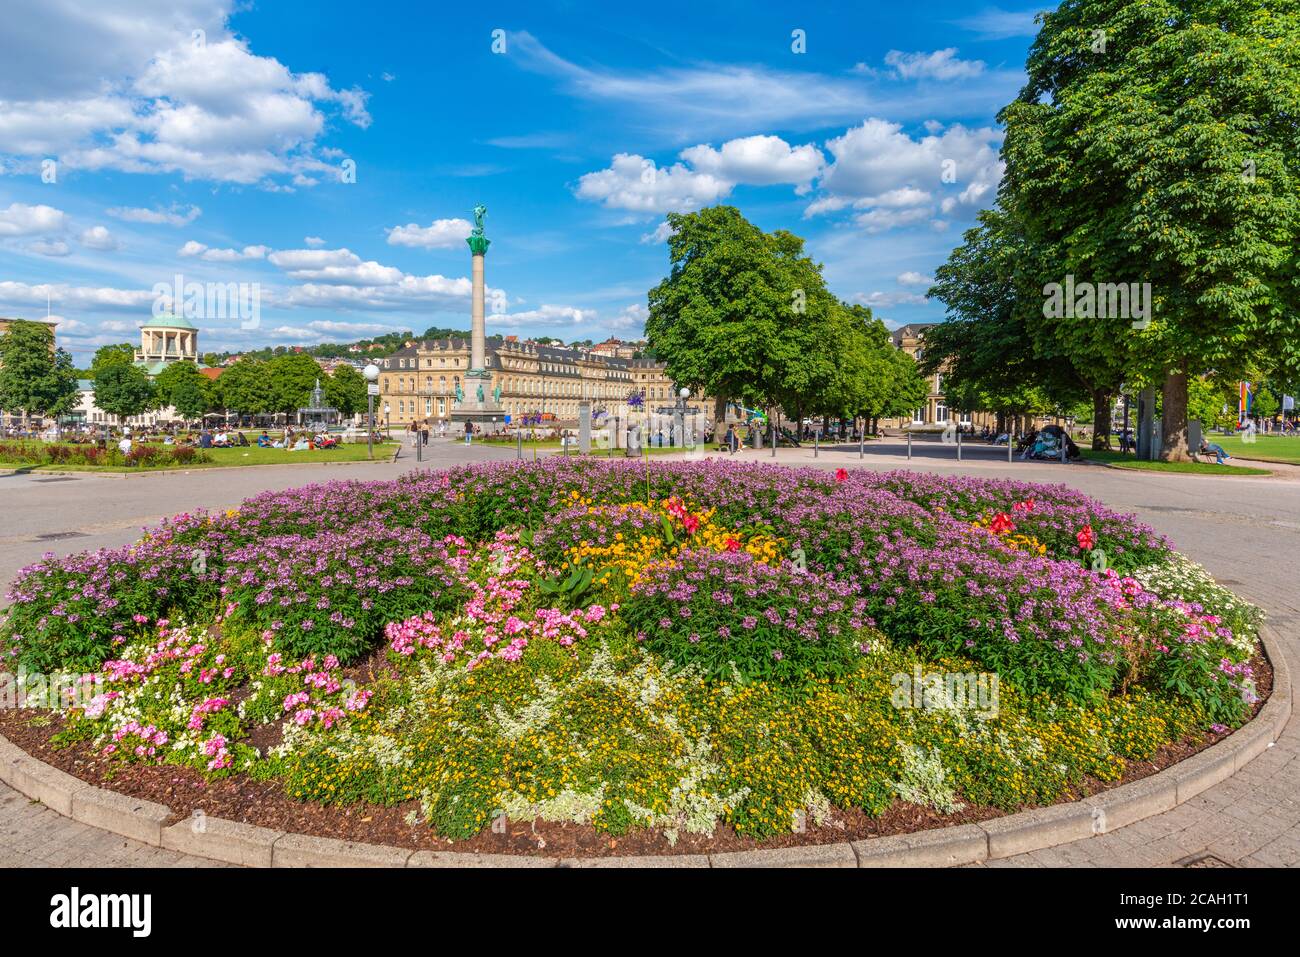 Palace Neues Schloss, Kunsthalle, Schlossplatz or Castle Square  in the city centre, Stuttgart, Federal State Baden-Württemberg, South Germany, Europe Stock Photo